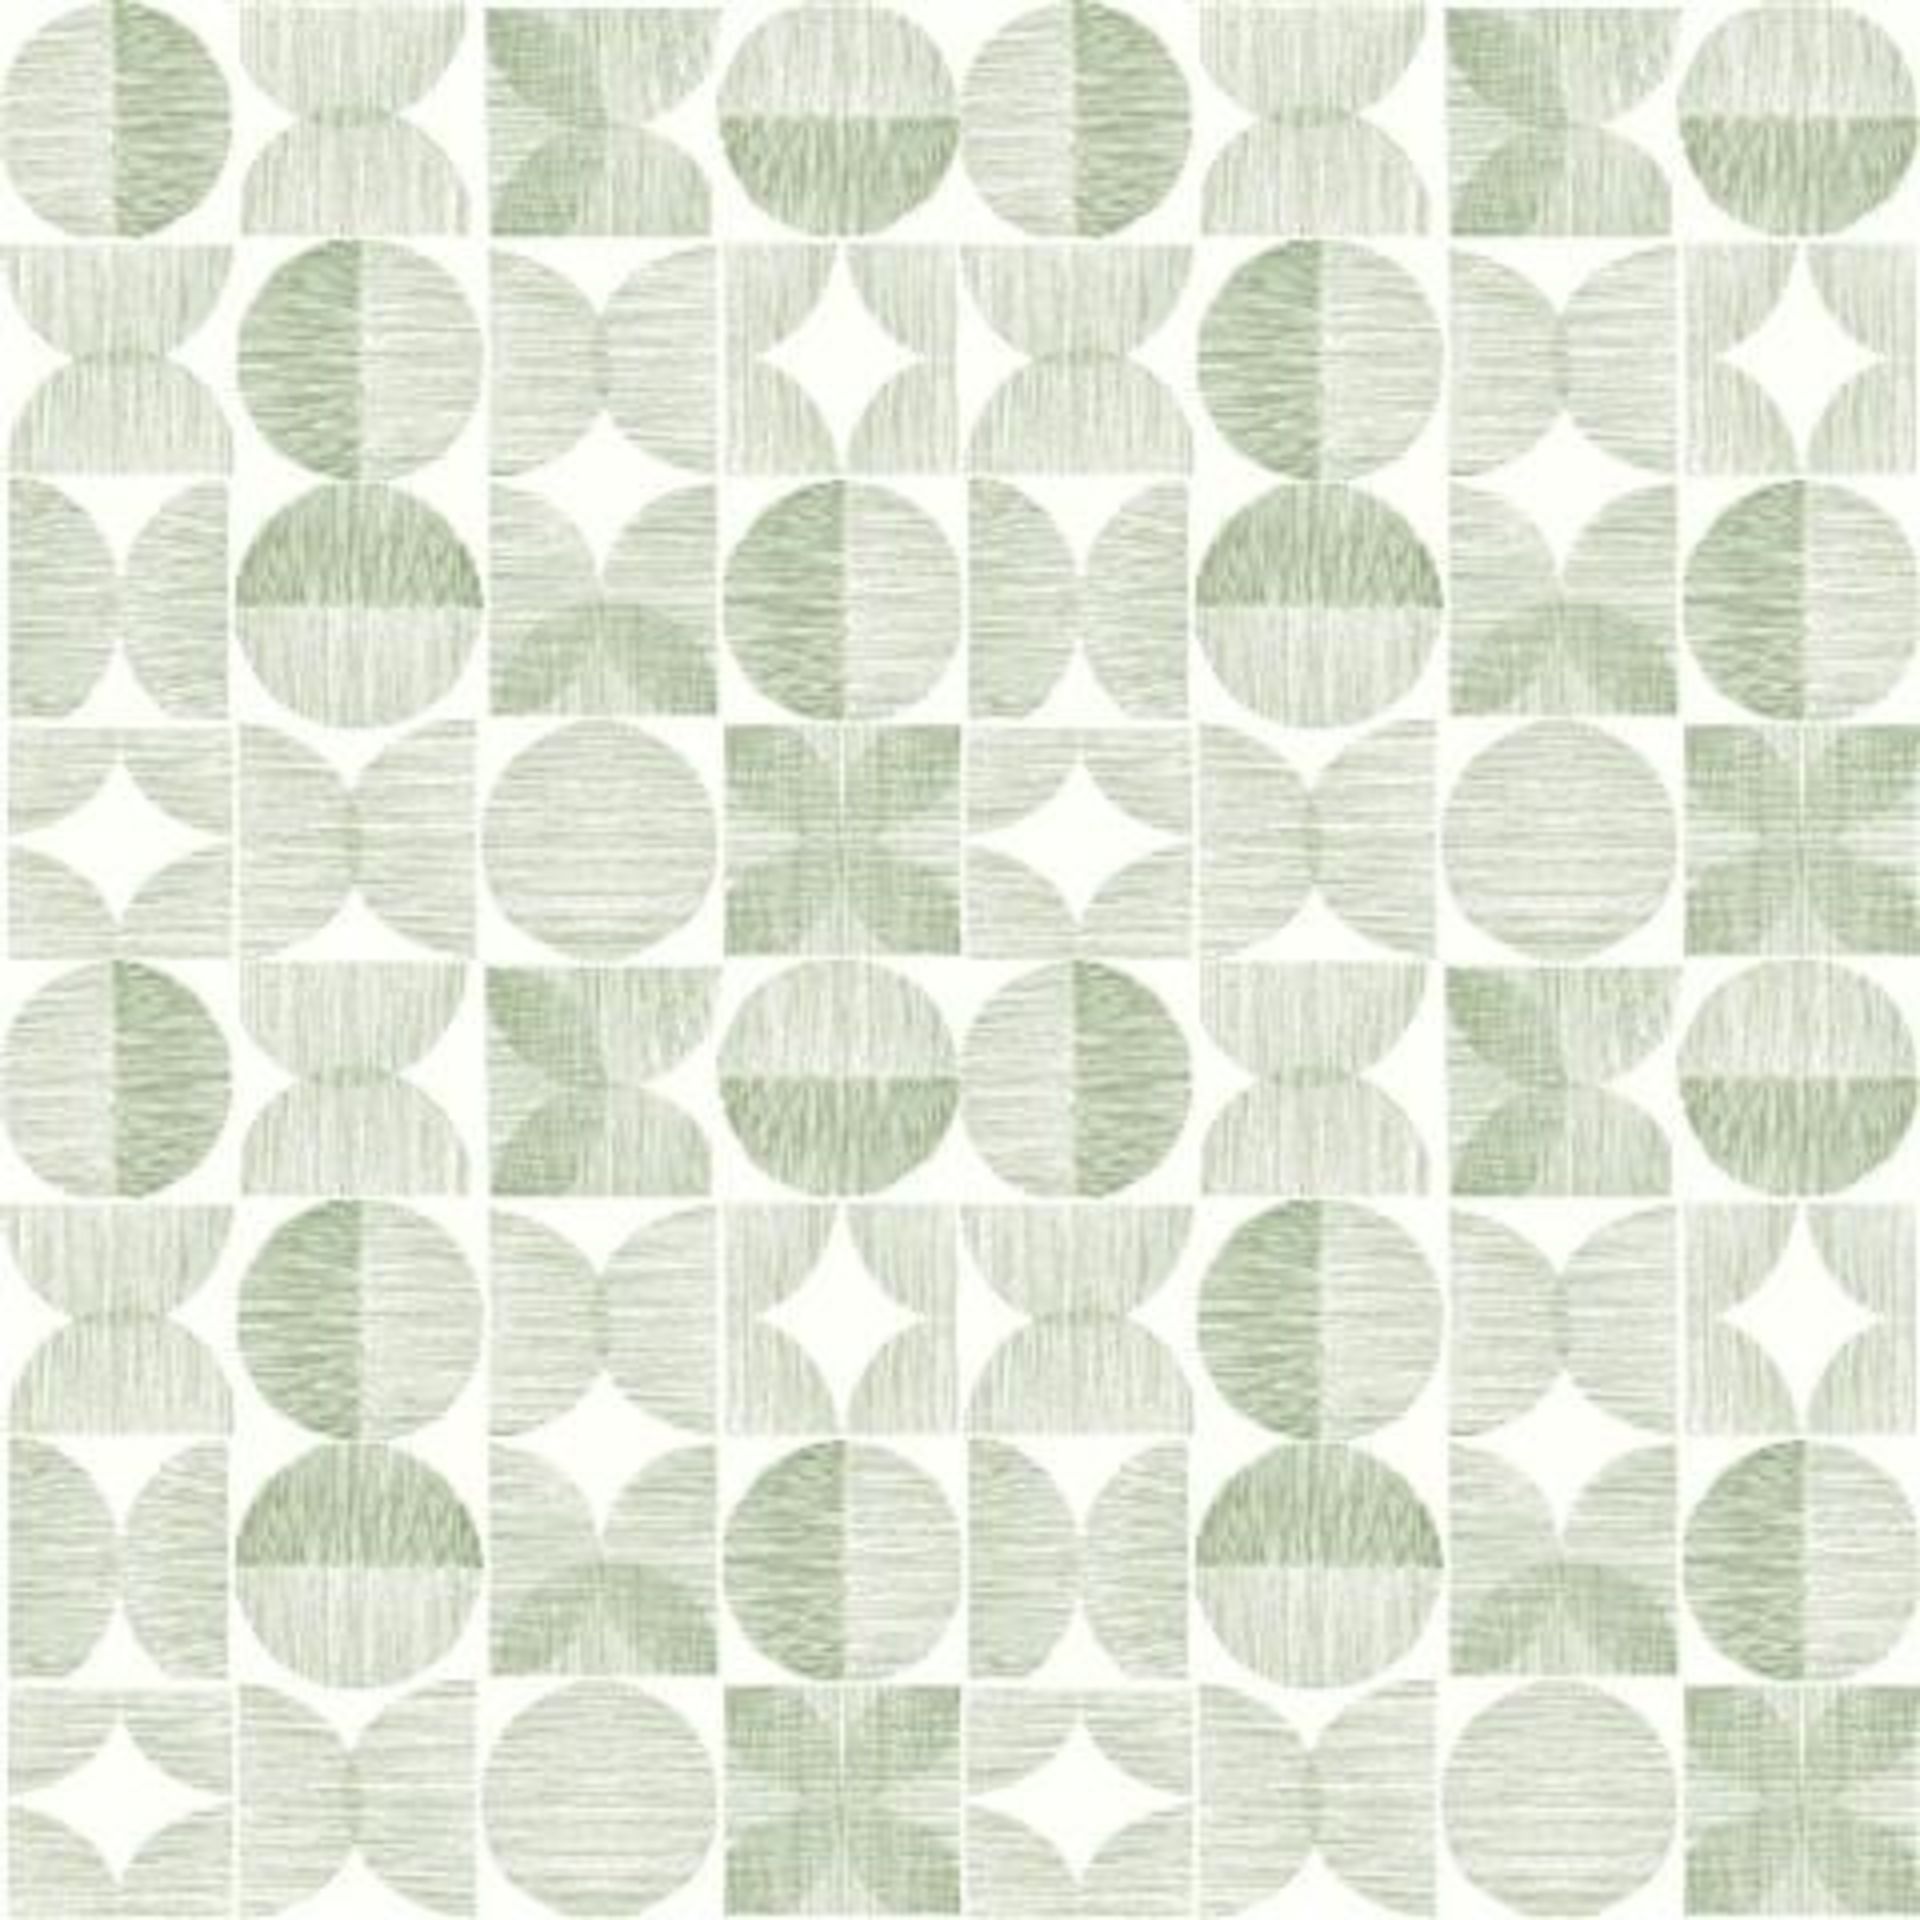 1 AS NEW ROLL OF ARTHOUSE RETRO CIRCLE GREEN WALLPAPER - 902403 / RRP £8.99